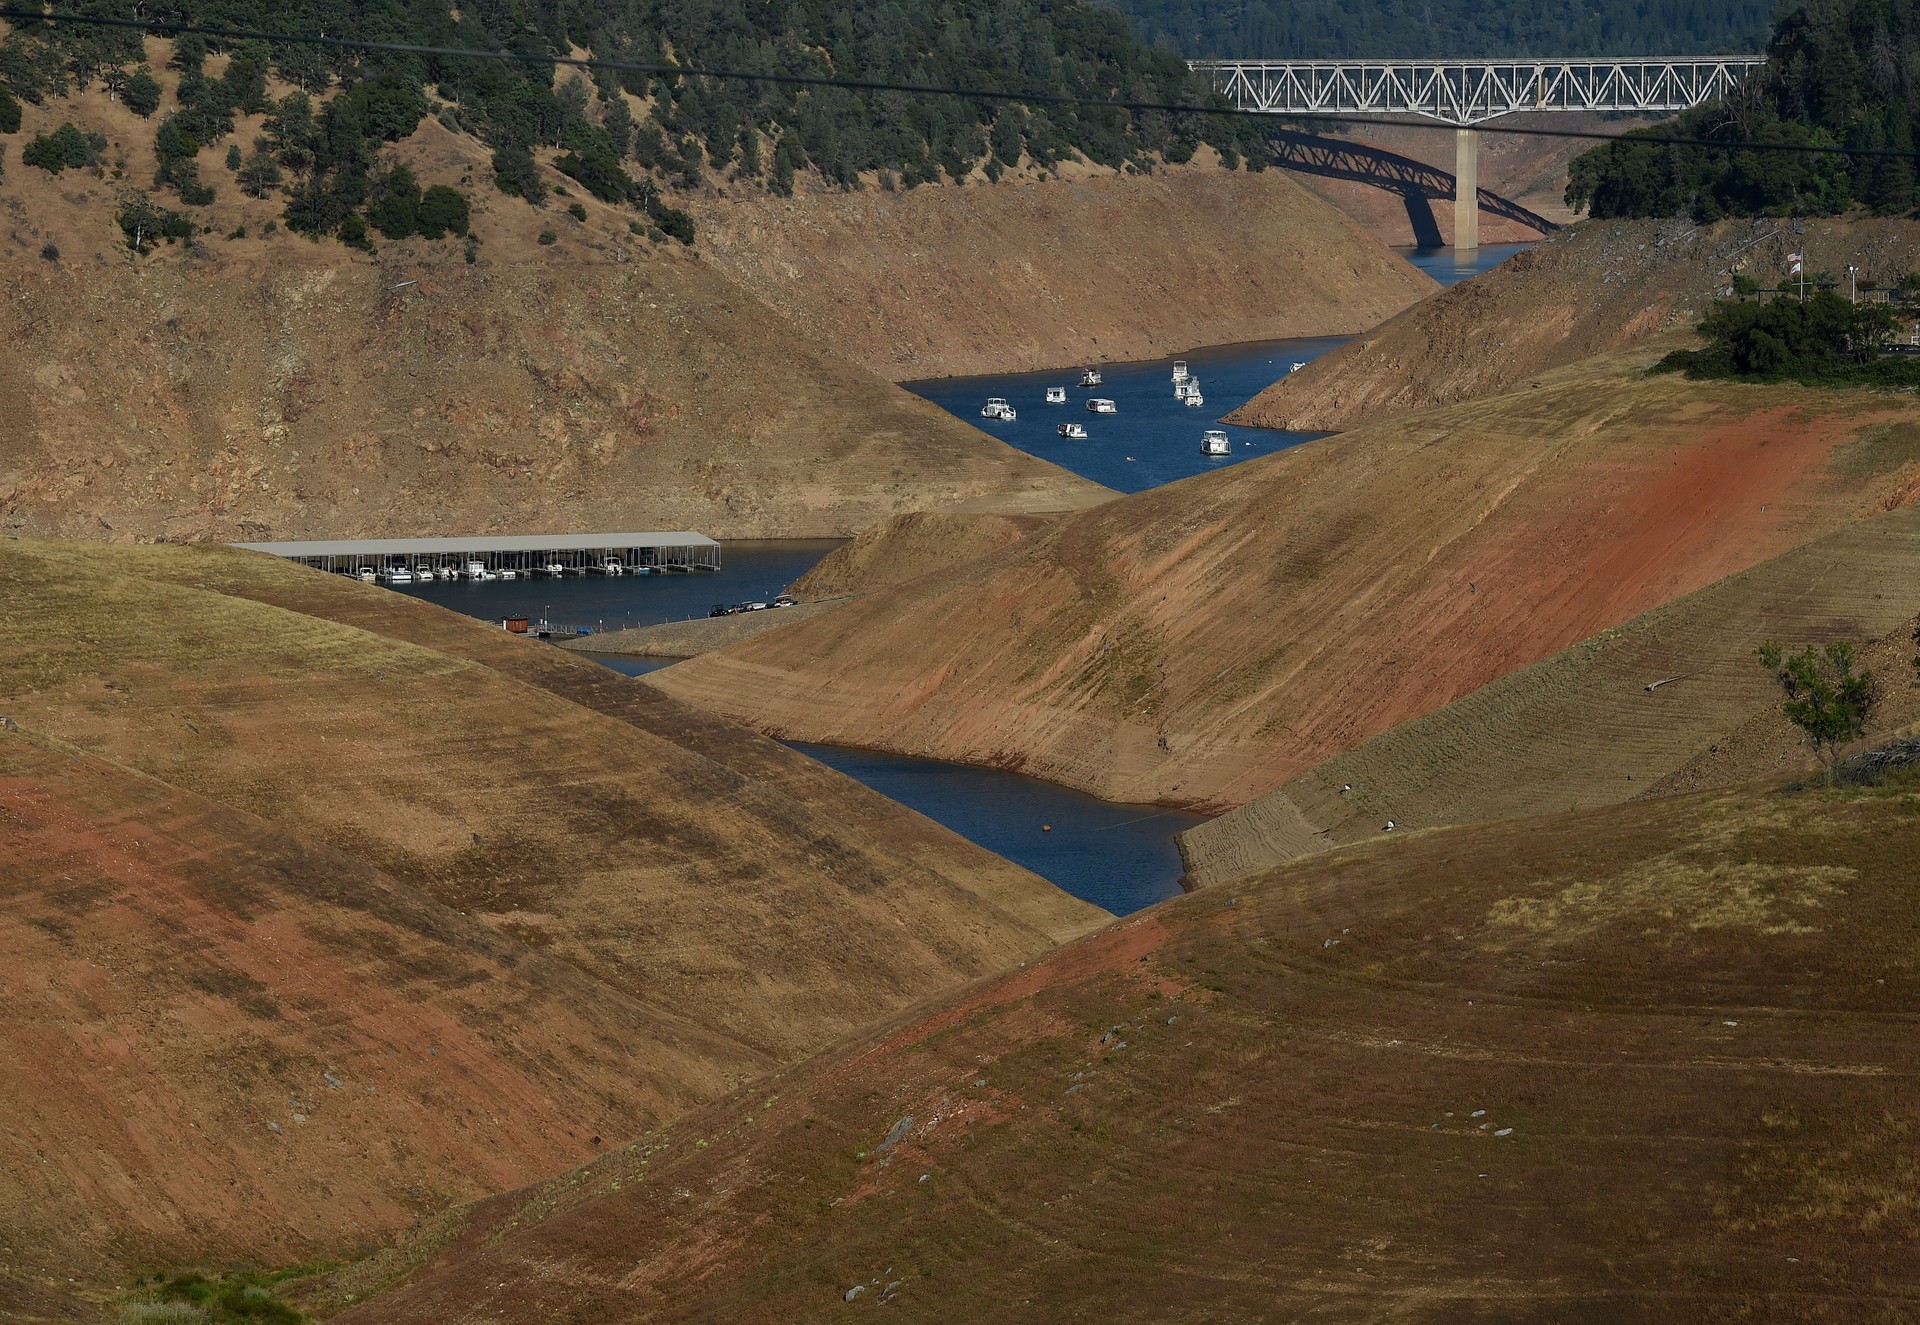 Lake Oroville, reduced to a relative puddle in 2015. This year it overflowed. Reservoir levels are one of more than 100 indicators considered by the U.S. Drought Monitor.